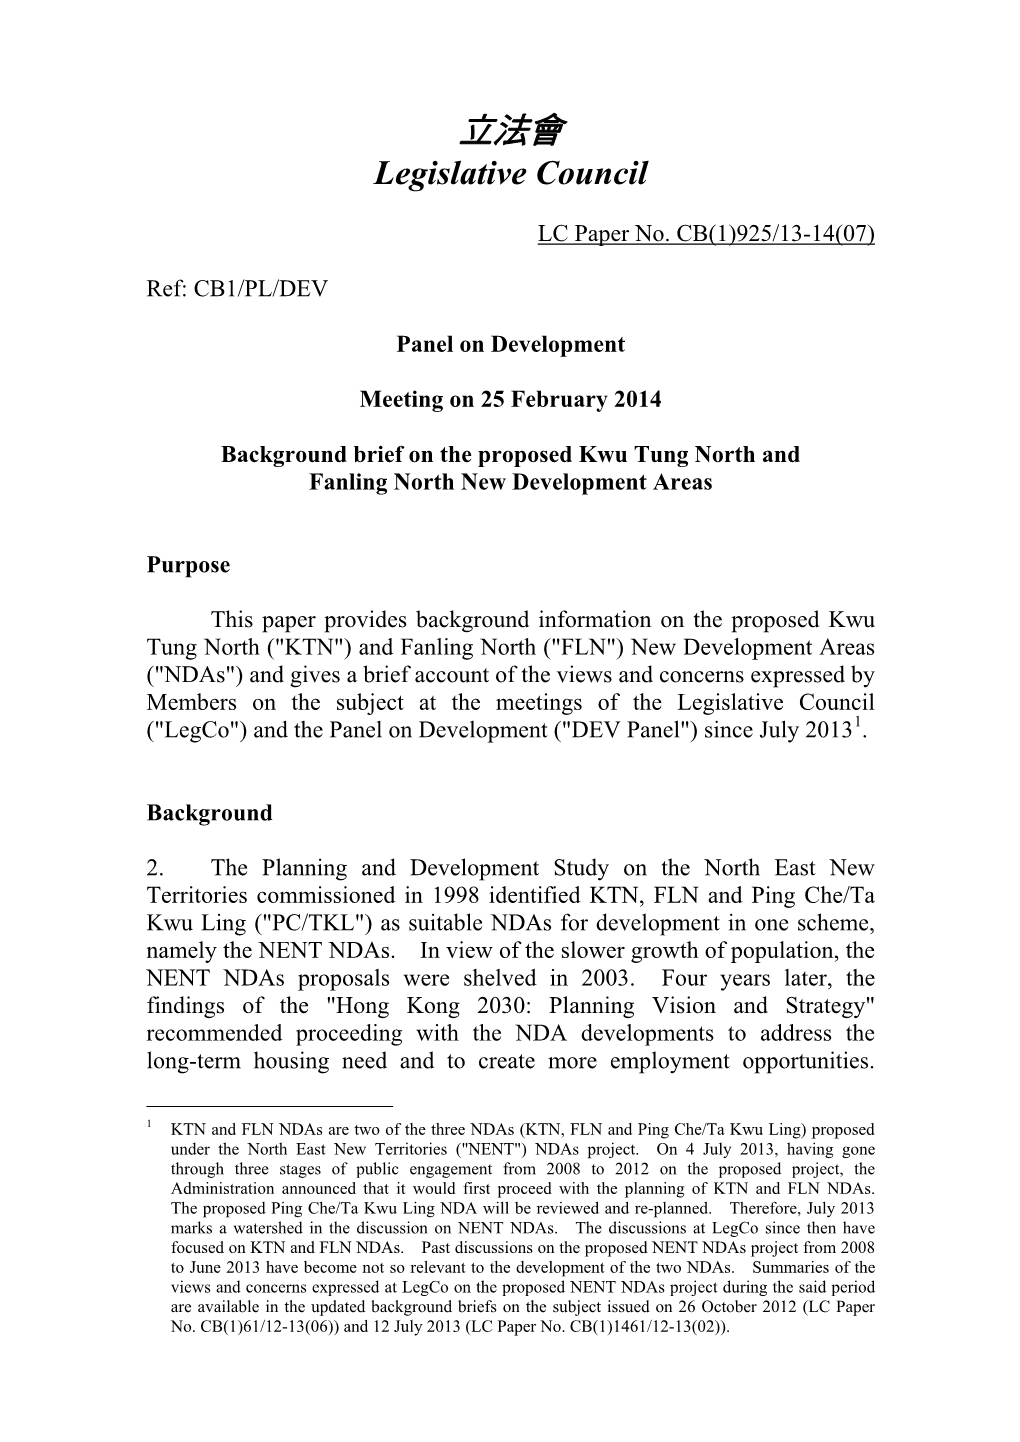 Paper on the Proposed Kwu Tung North and Fanling North